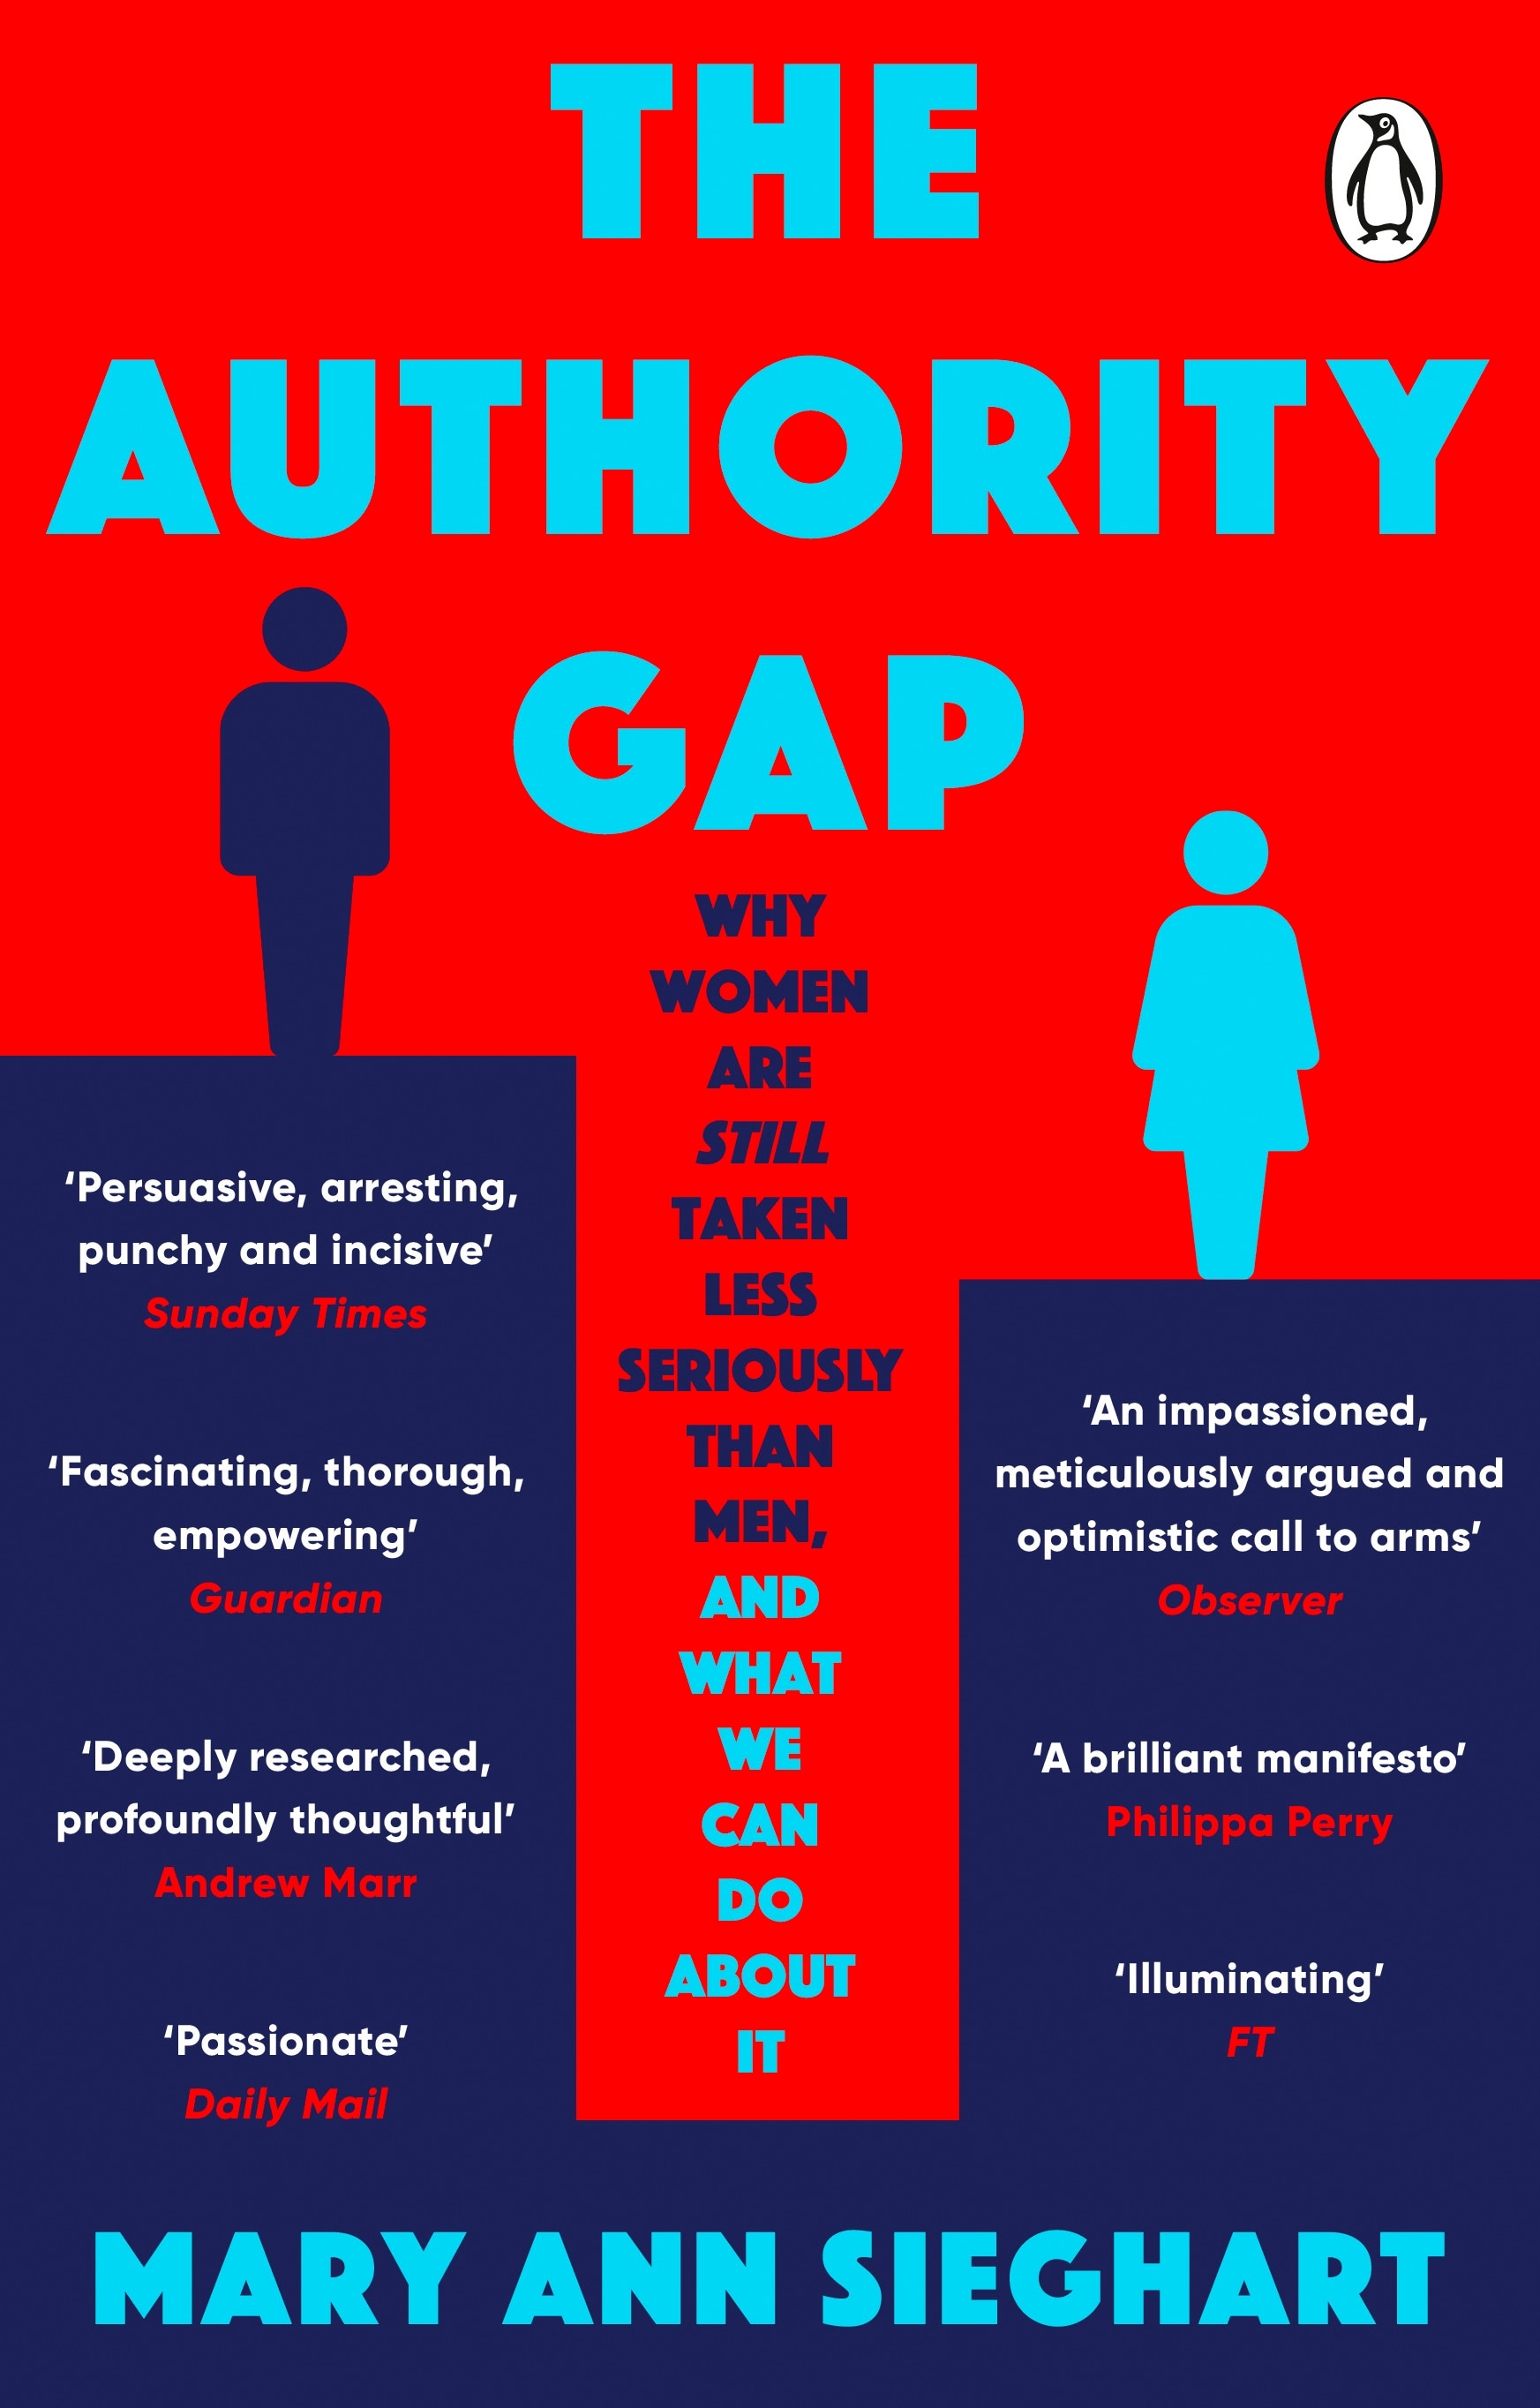 Book “The Authority Gap” by Mary Ann Sieghart — March 3, 2022